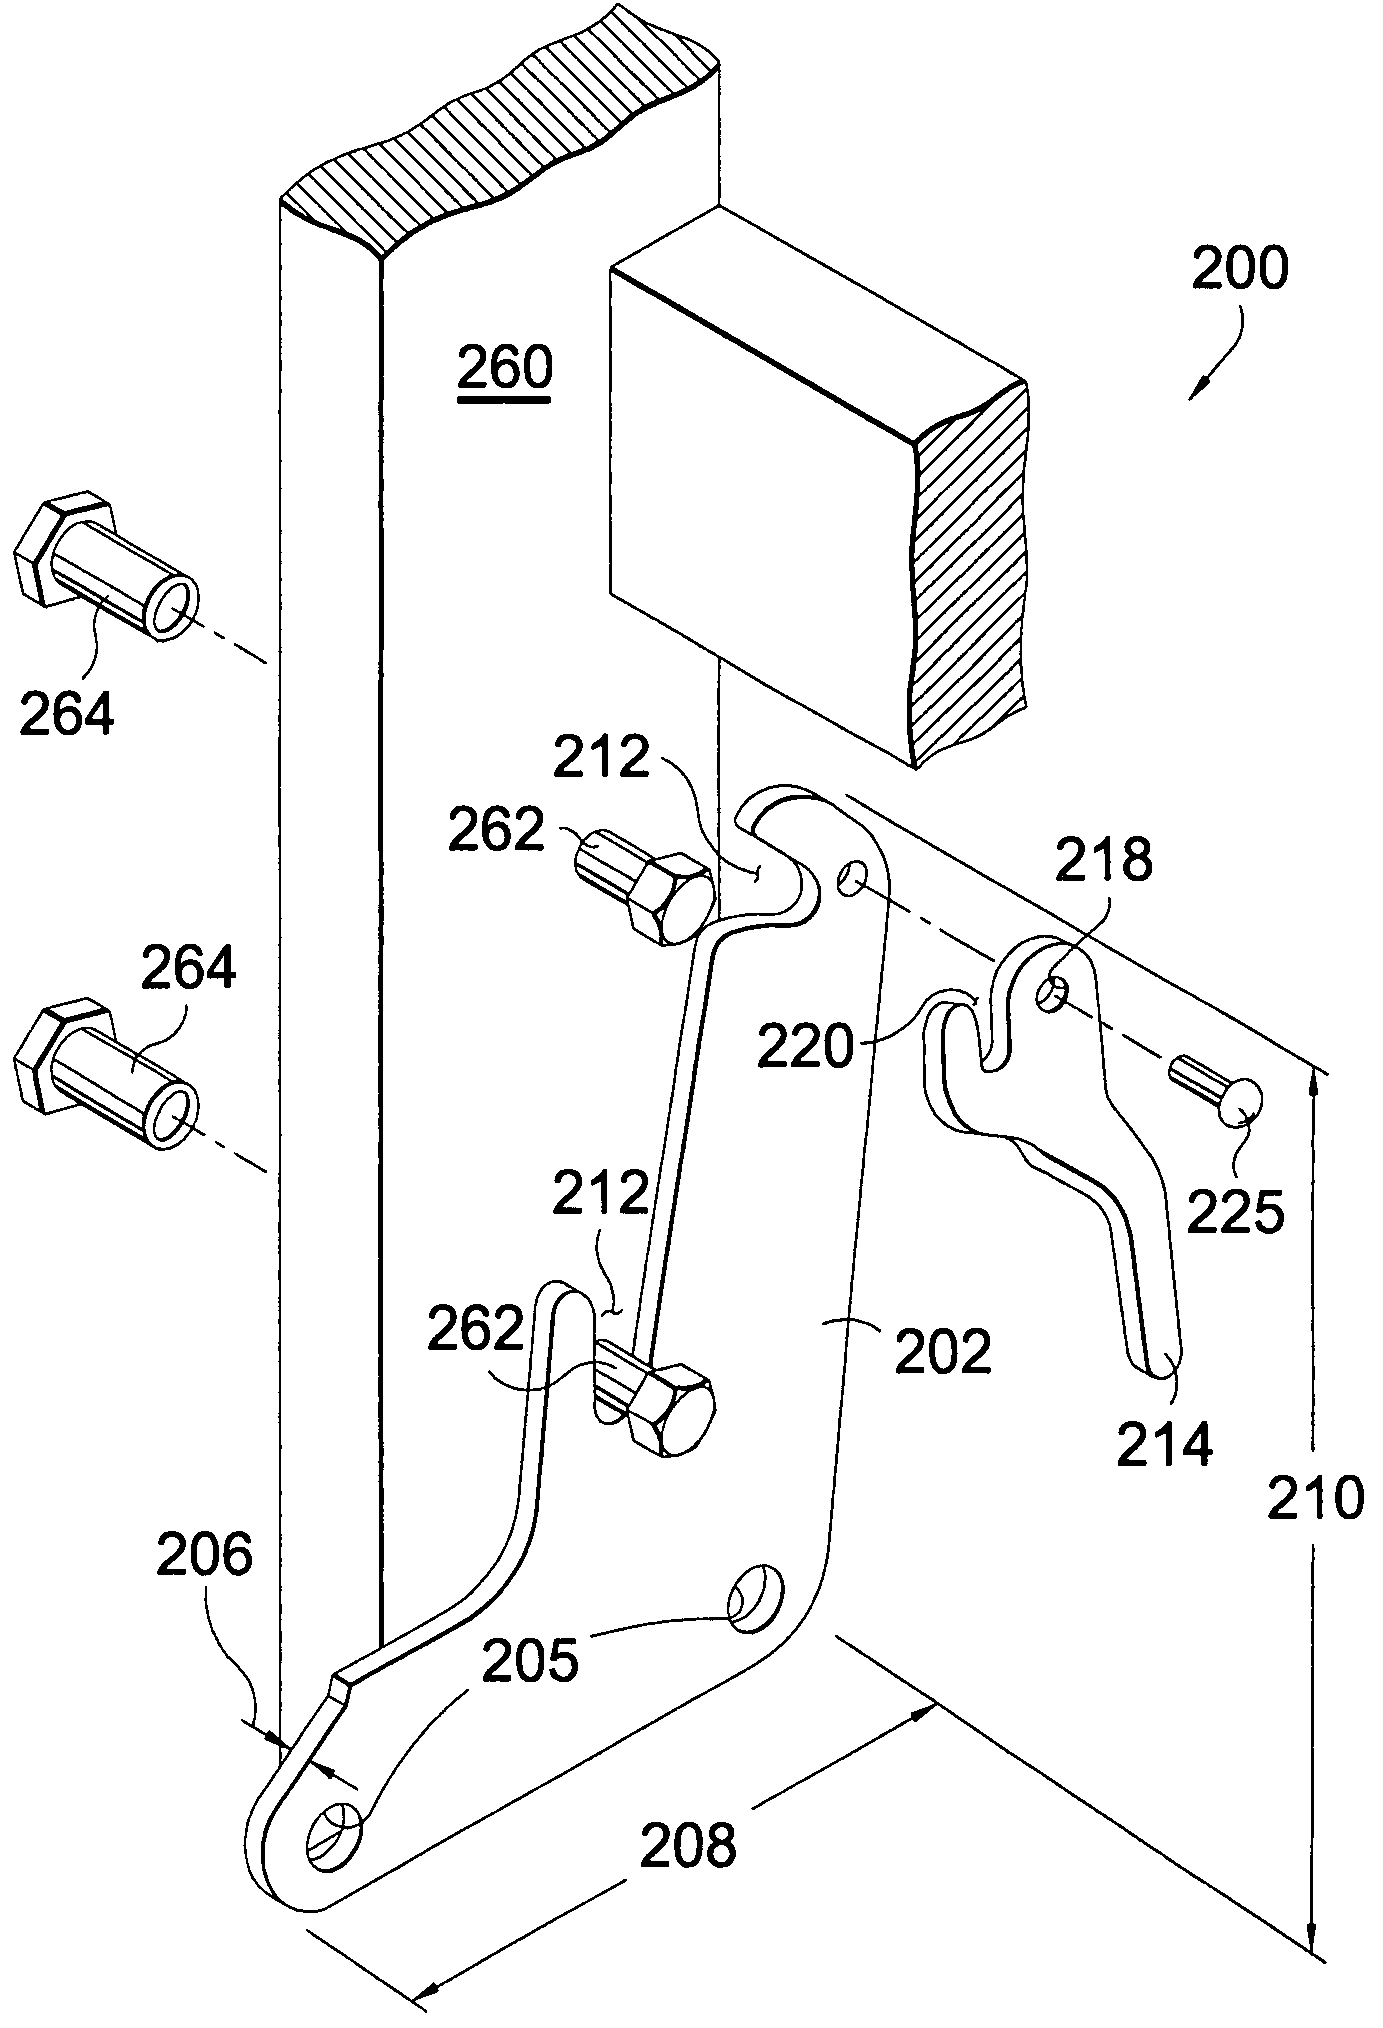 Knockdown attachment mechanism for a reclining chair